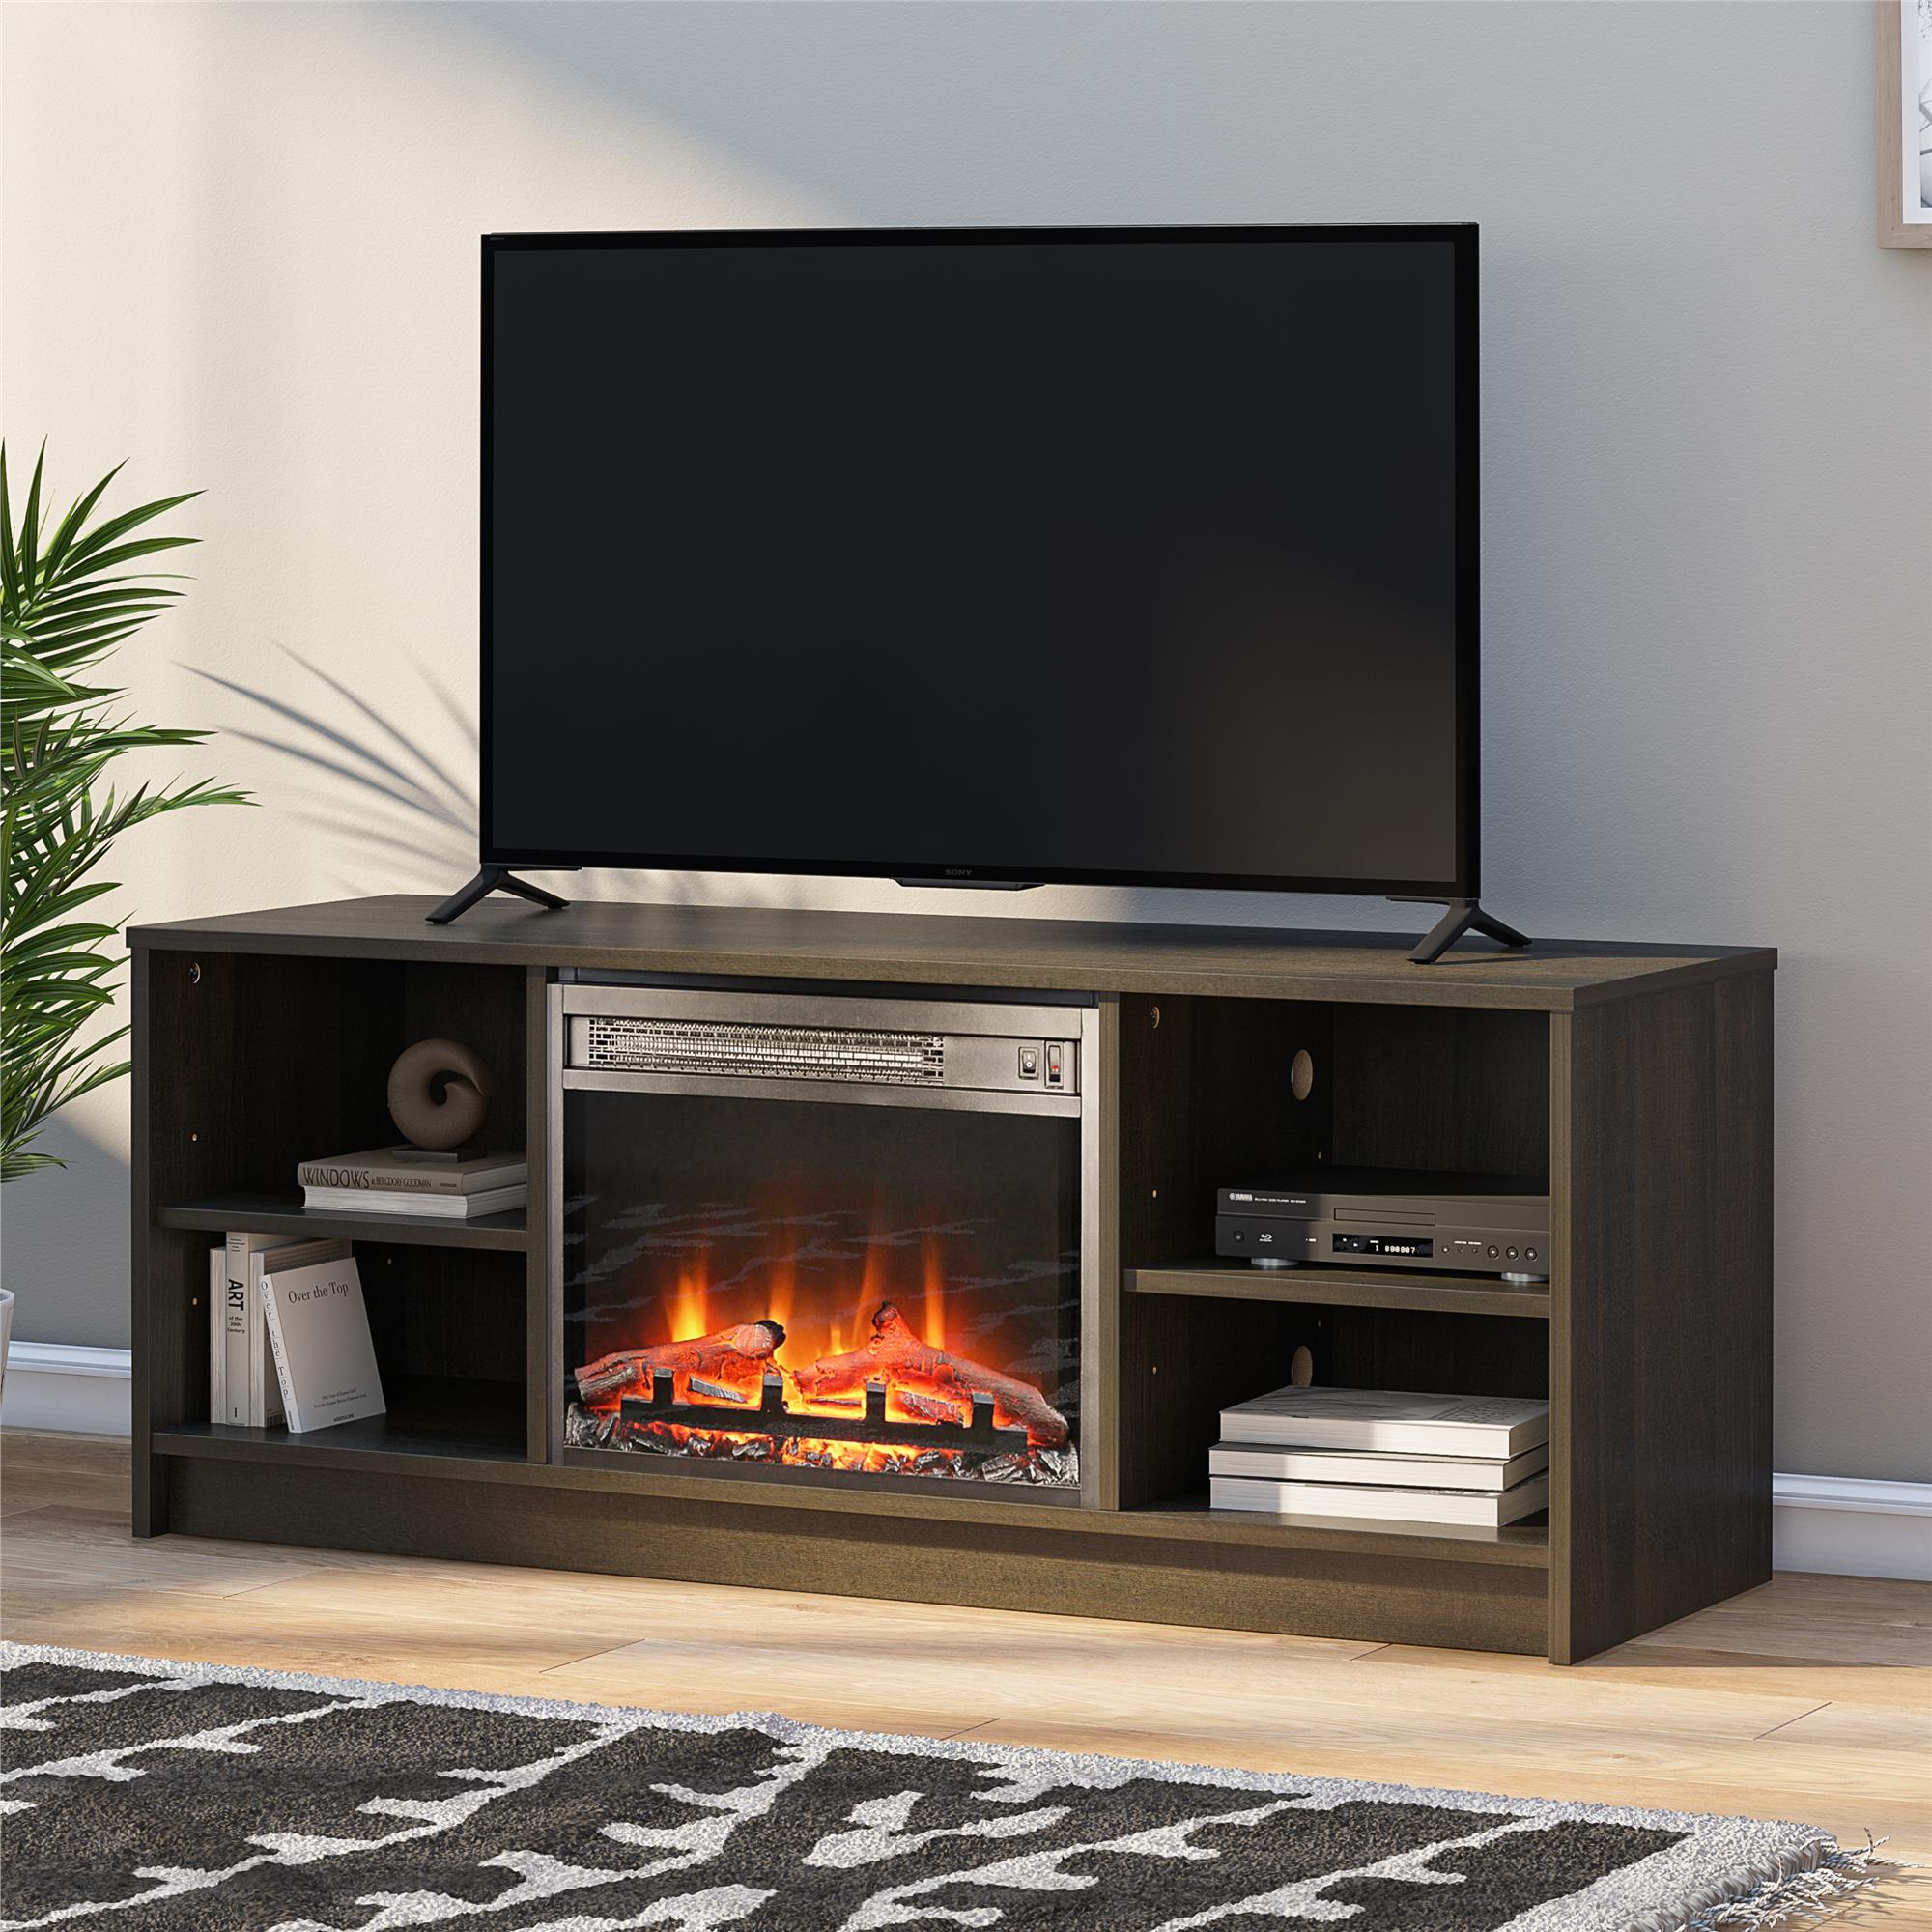 Mainstays Fireplace TV Stand, for TVs up to 55", Espresso - image 1 of 12